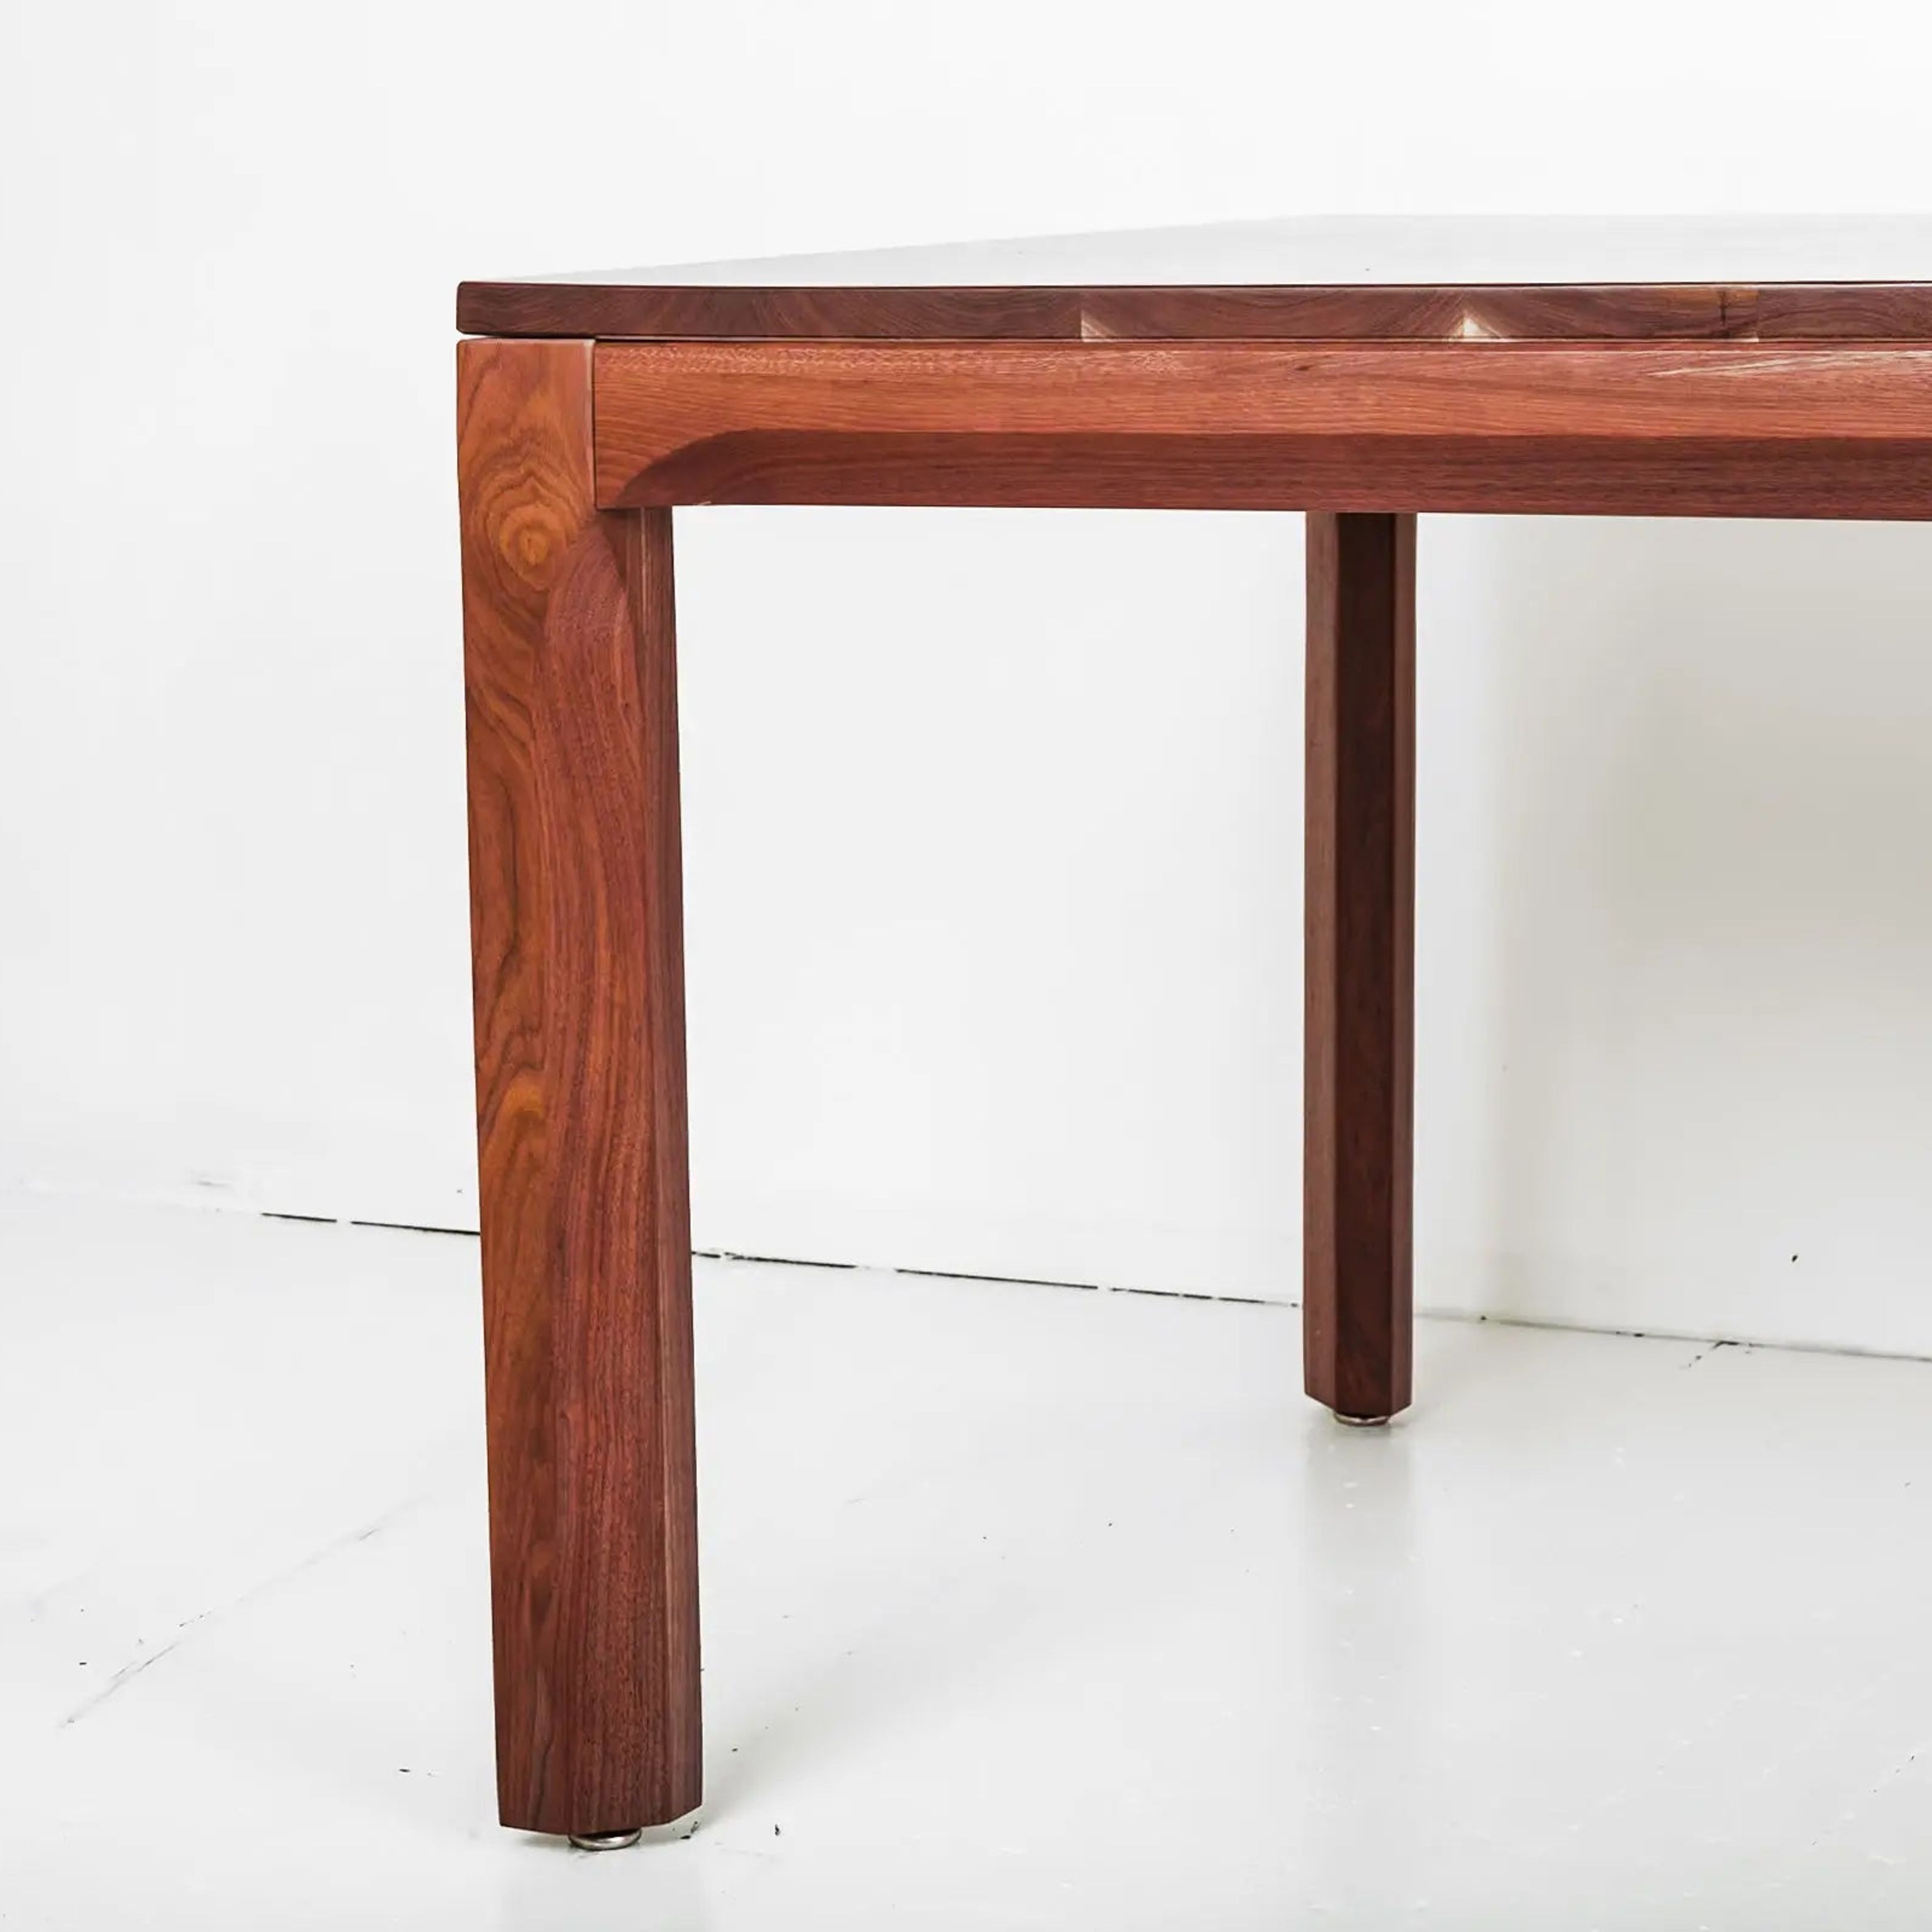 The Compagno Extendable Dining Table